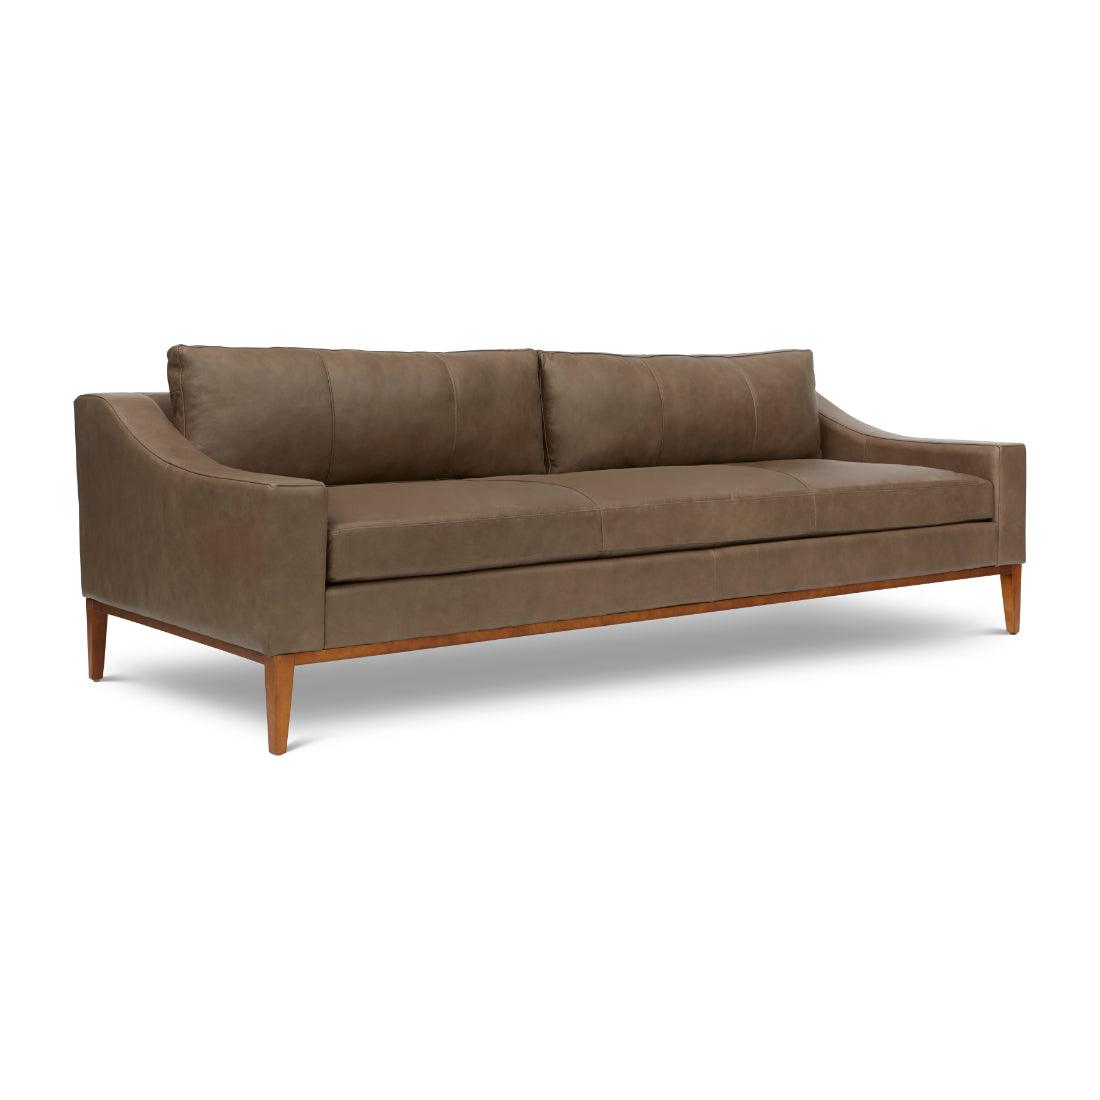 Haut Luxurious Made to Order Leather Bench Seat Couch - Uptown Sebastian